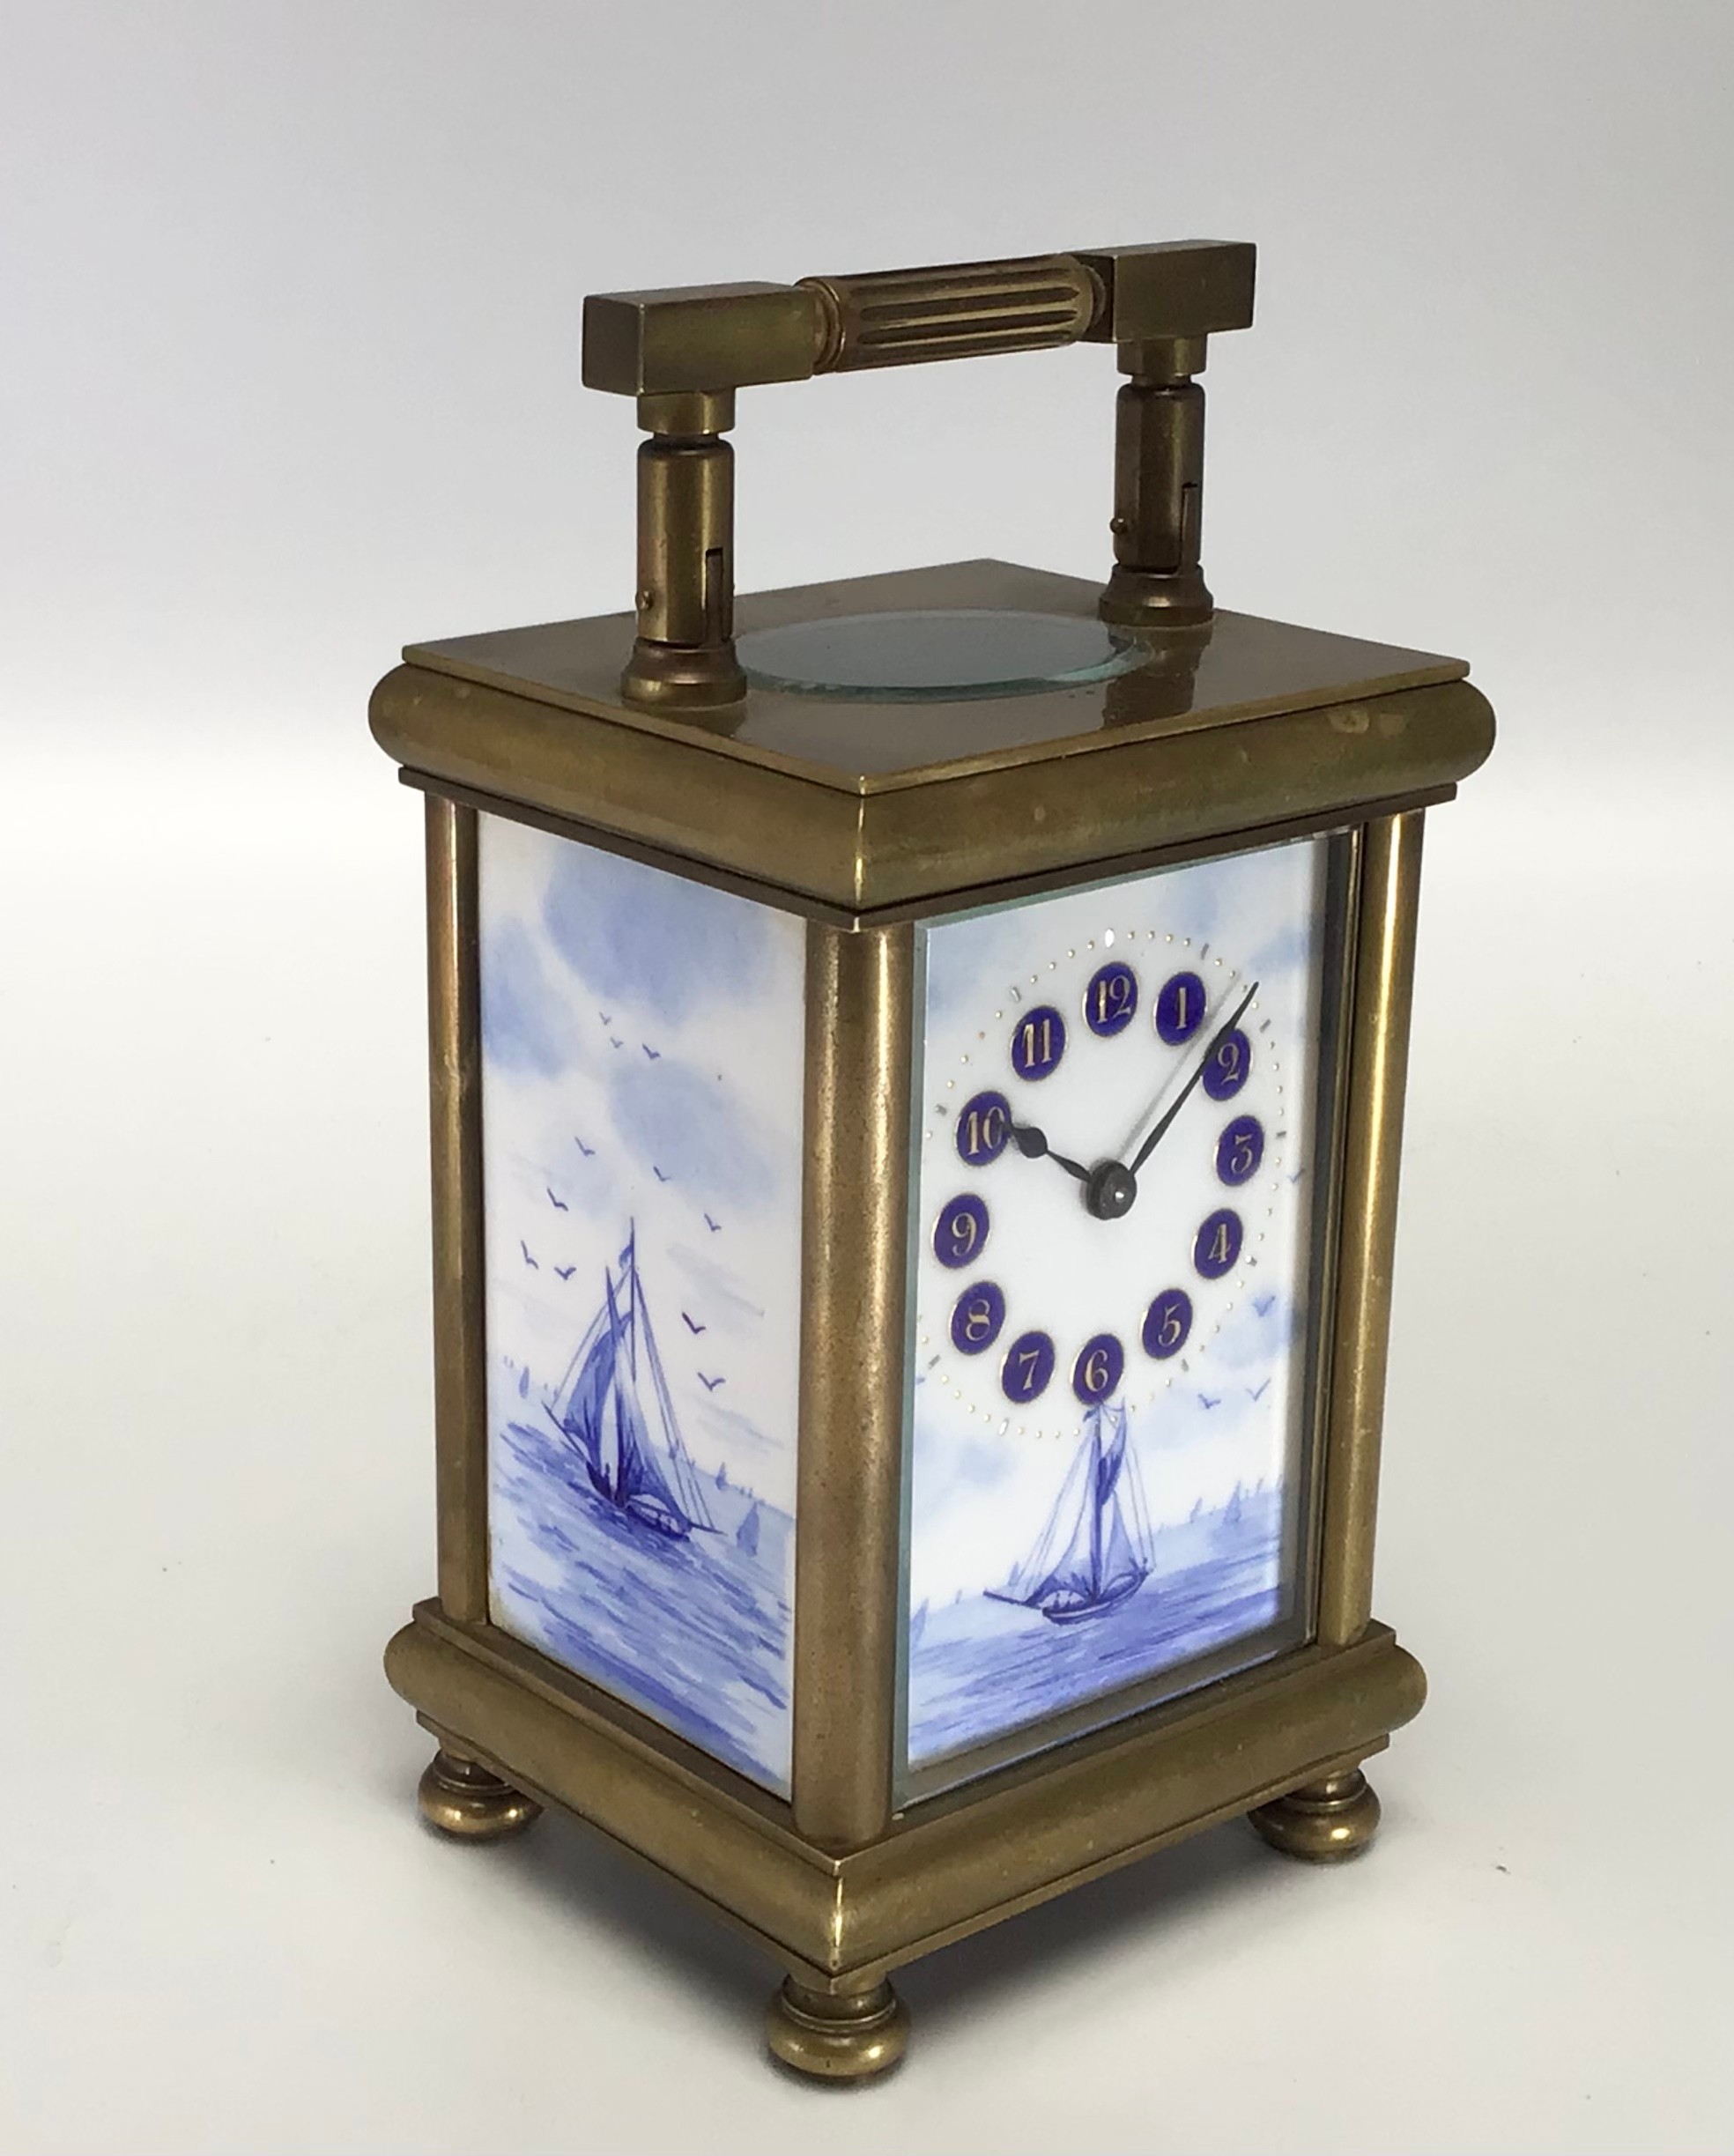 A Swiss brass cased carriage clock with blue and white porcelain panelled sides and dial panel, - Image 5 of 8